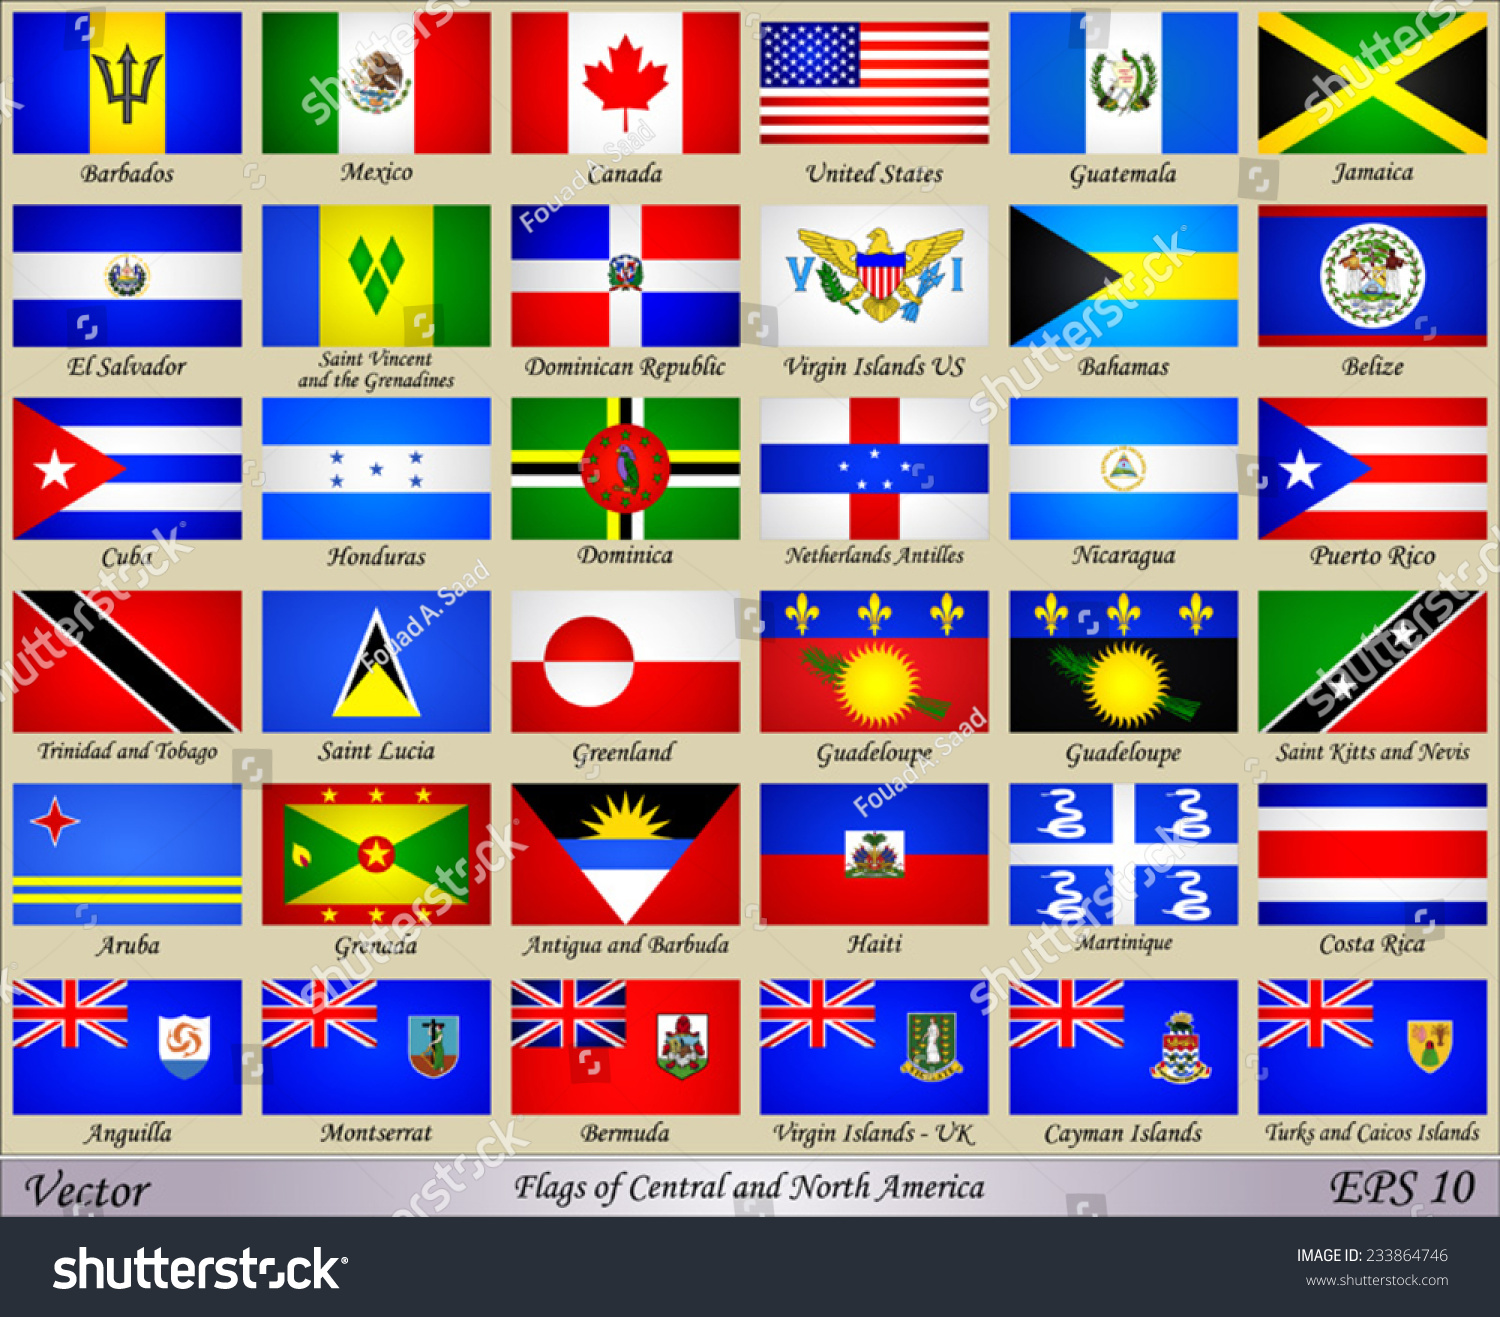 Central American Flags Images